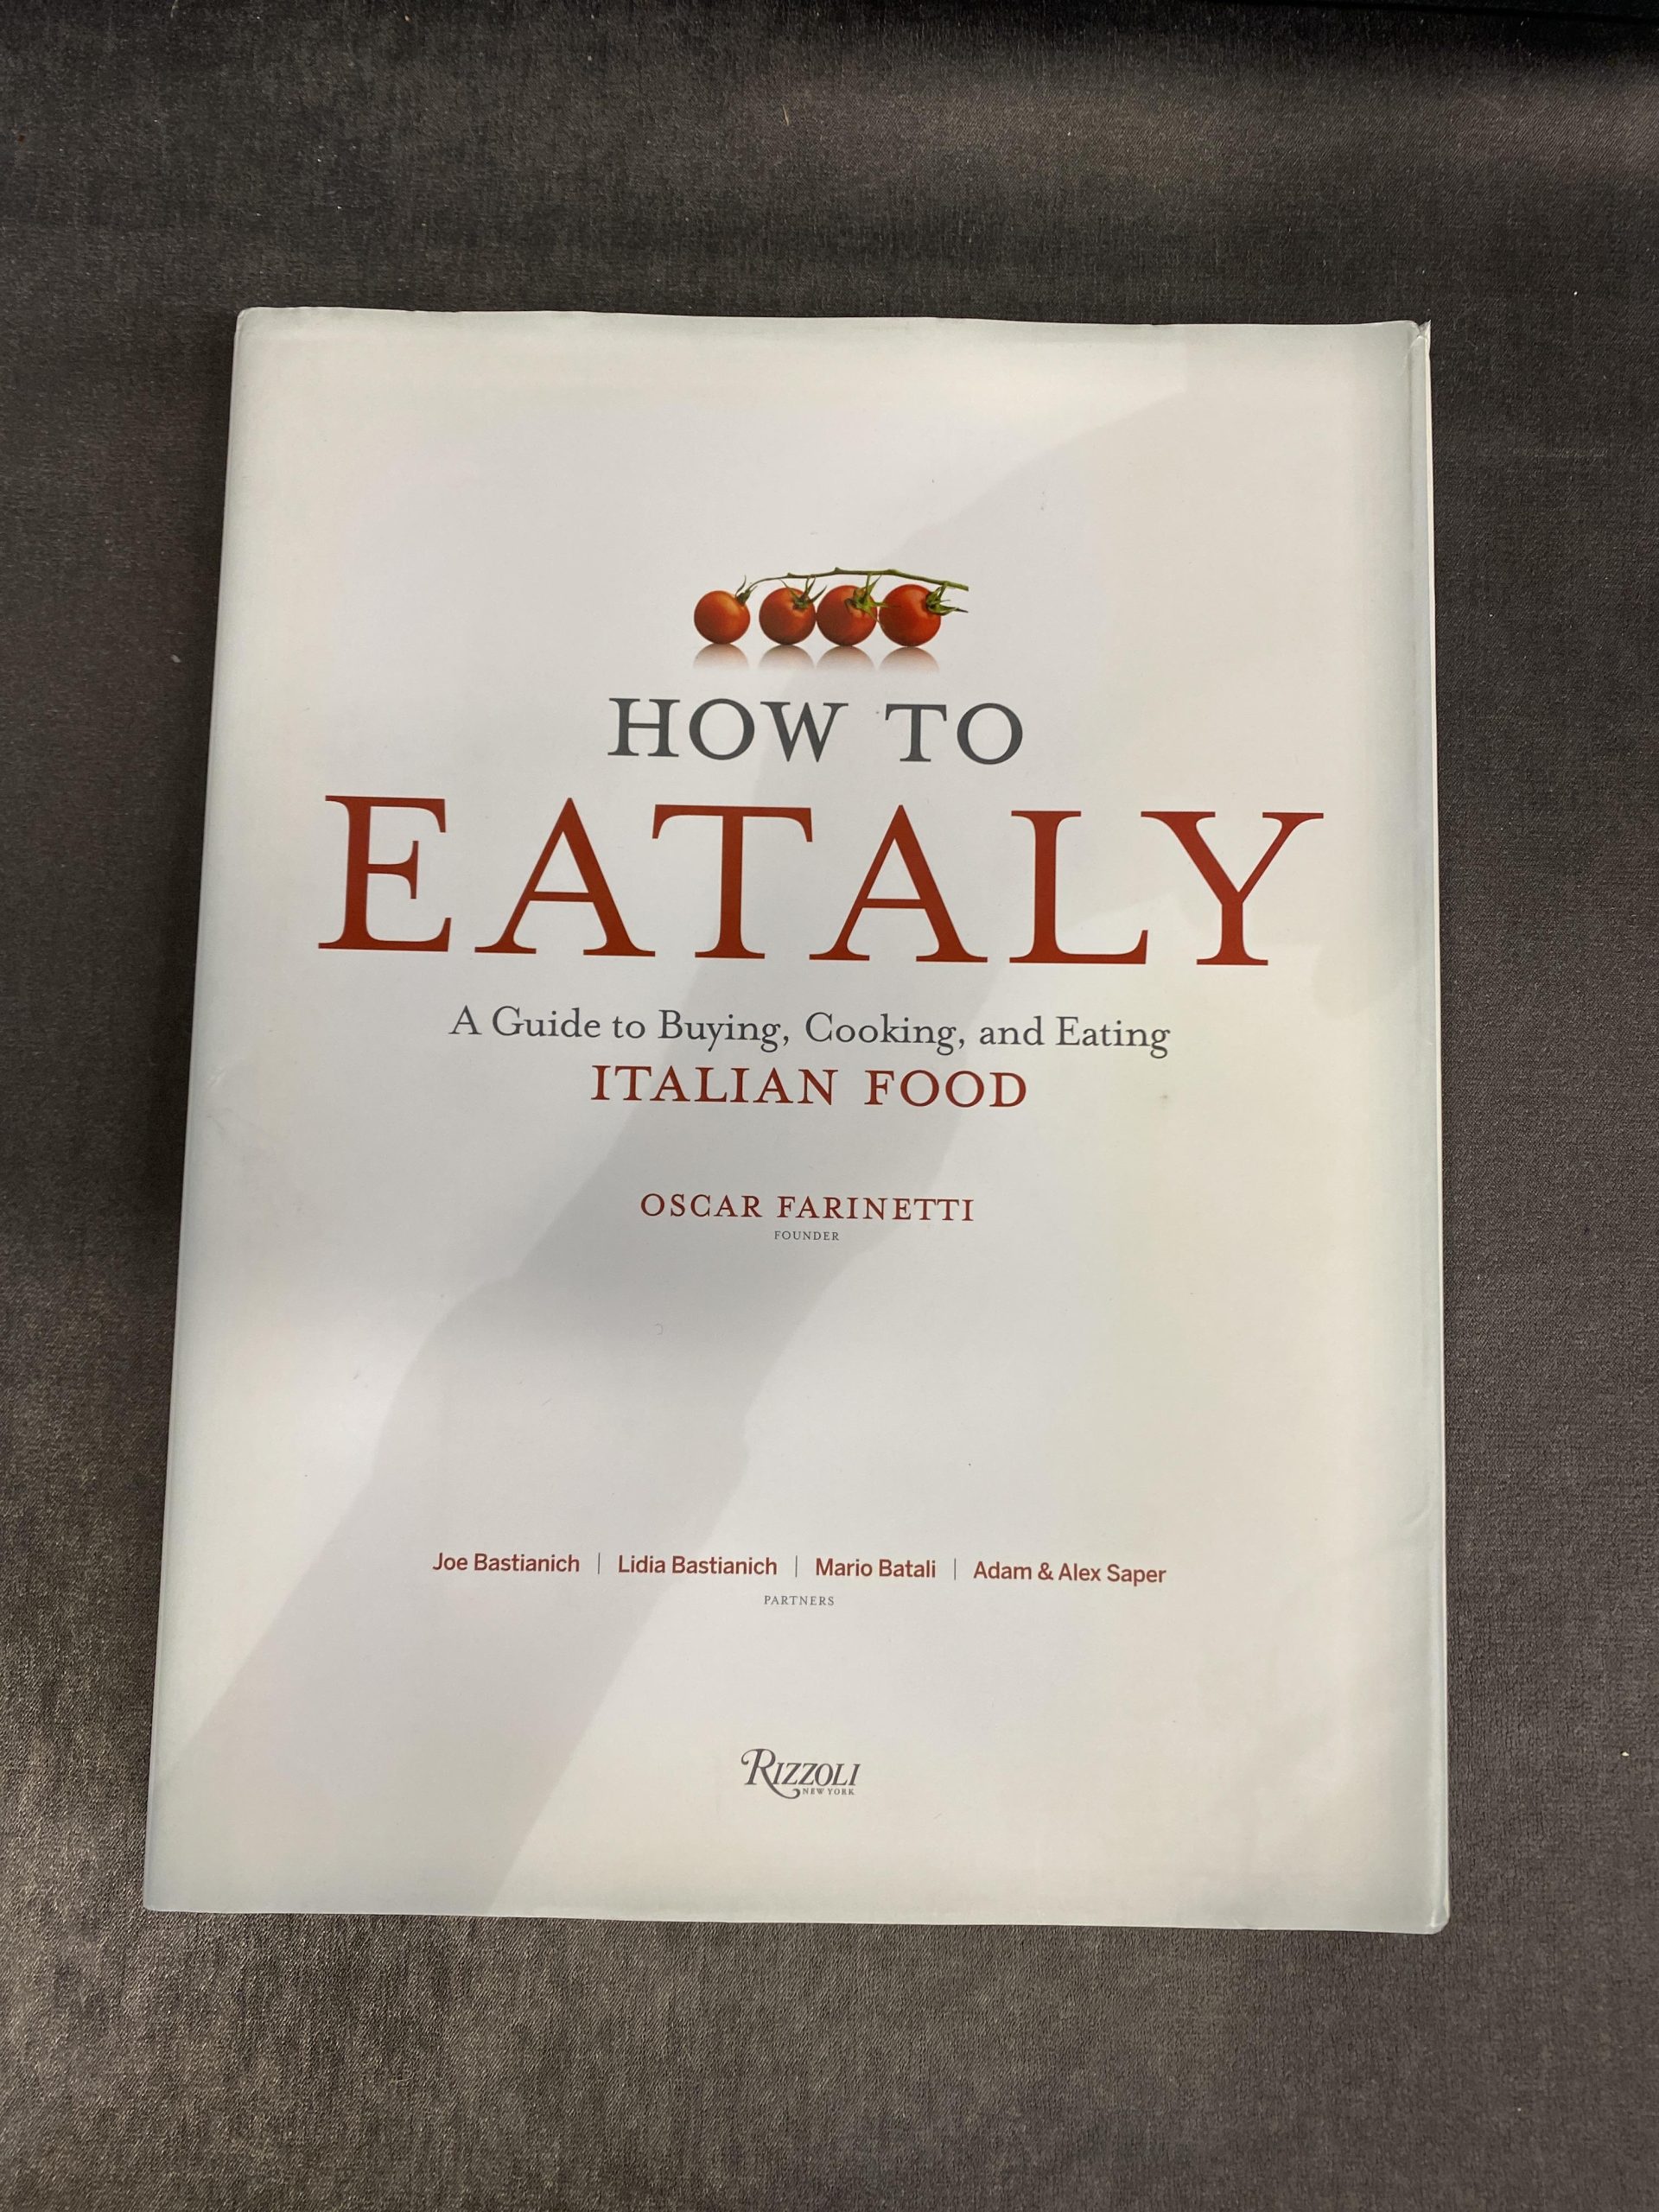 Cookbook – How To Eataly